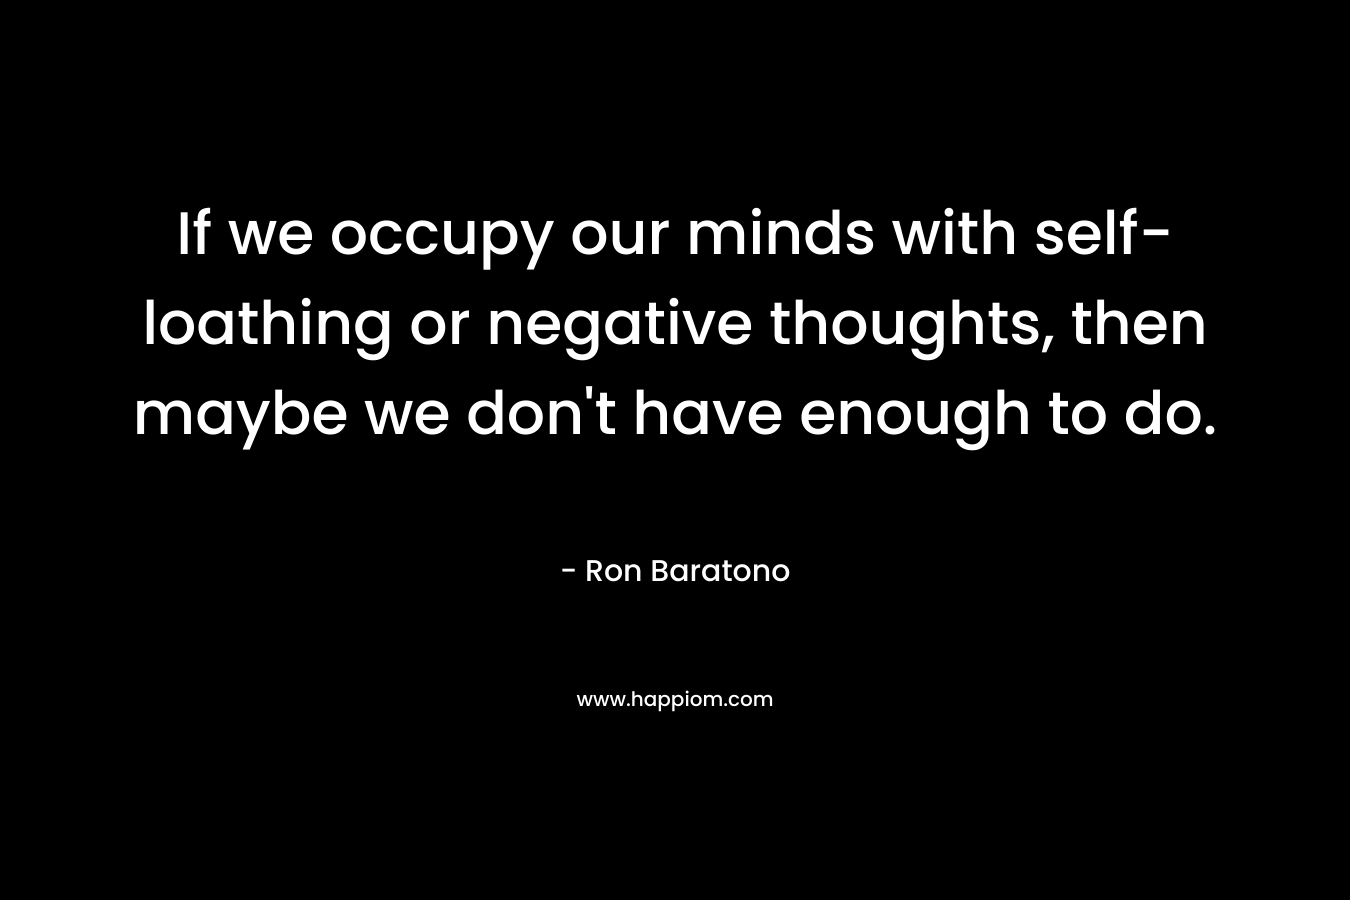 If we occupy our minds with self-loathing or negative thoughts, then maybe we don't have enough to do.